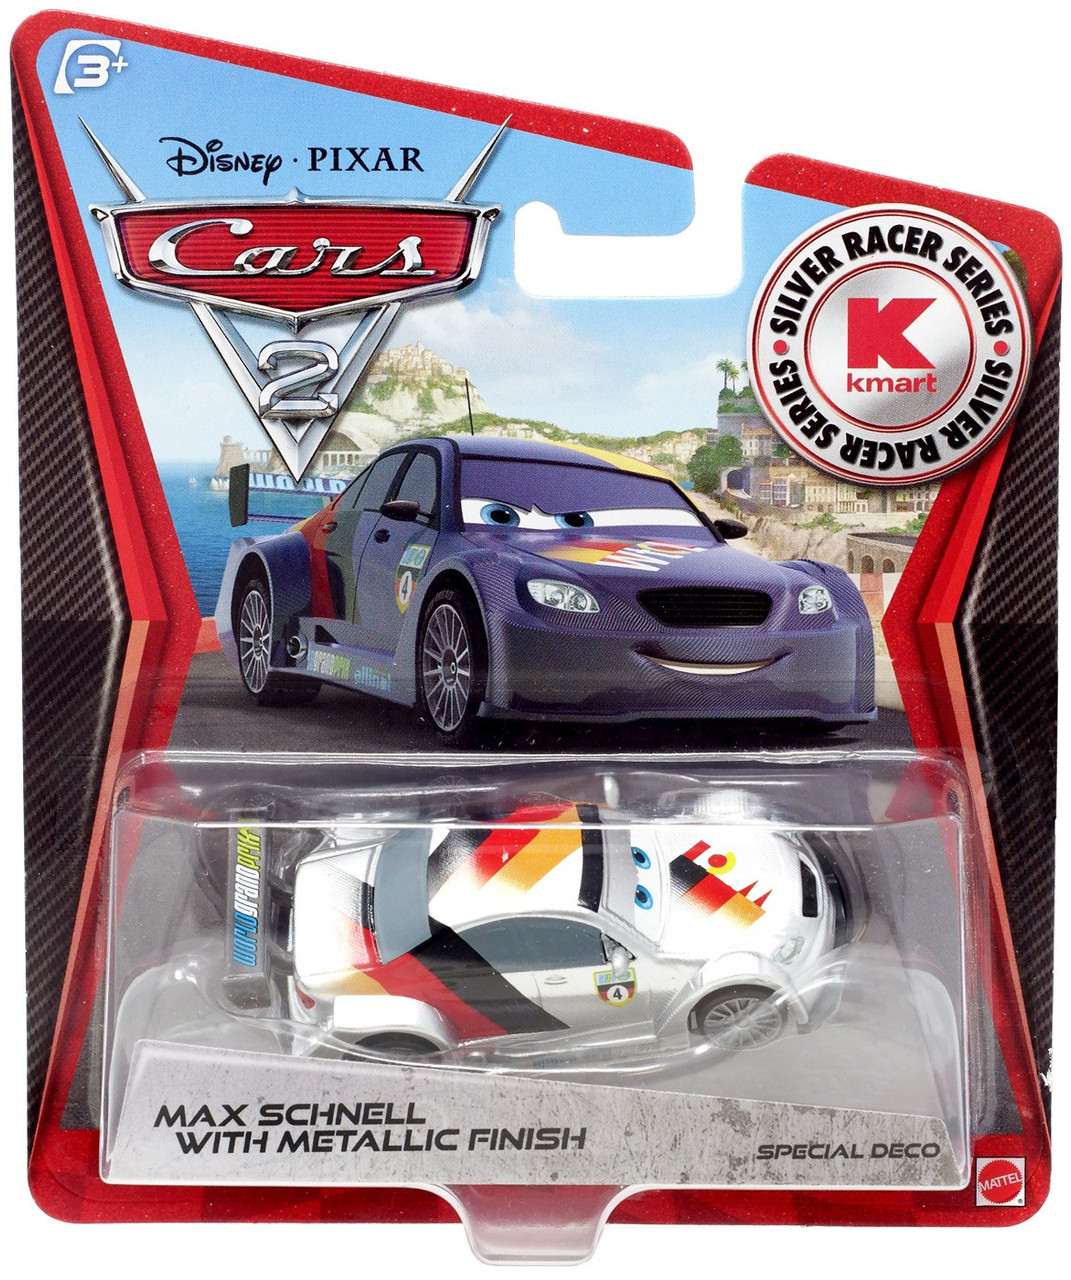 Disney Pixar Cars Cars 2 Silver Racer Series Max Schnell With Metallic Finish Exclusive 155 Diecast Car Mattel Toys Toywiz - roblox disney pixar cars 2